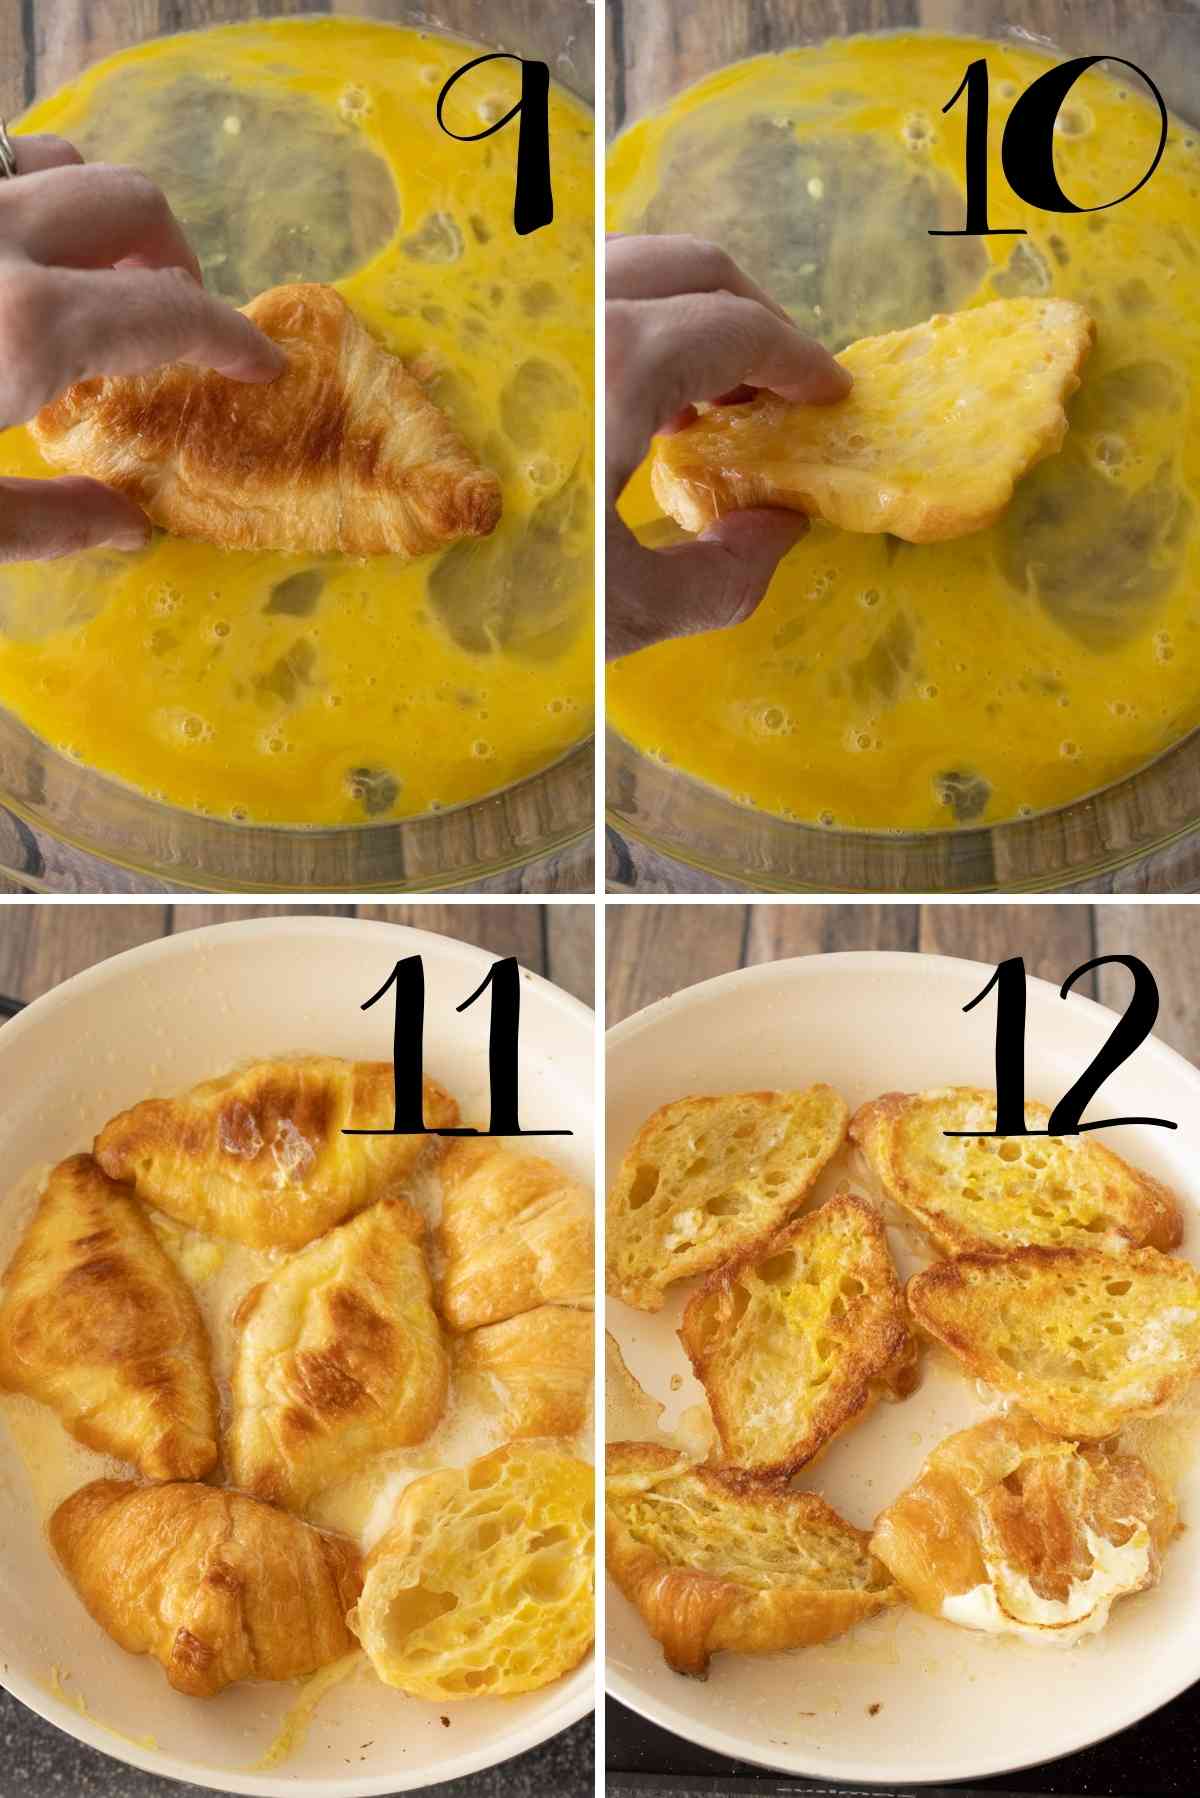 Dipping of croissants in eggs and then cooking in a frying pan.